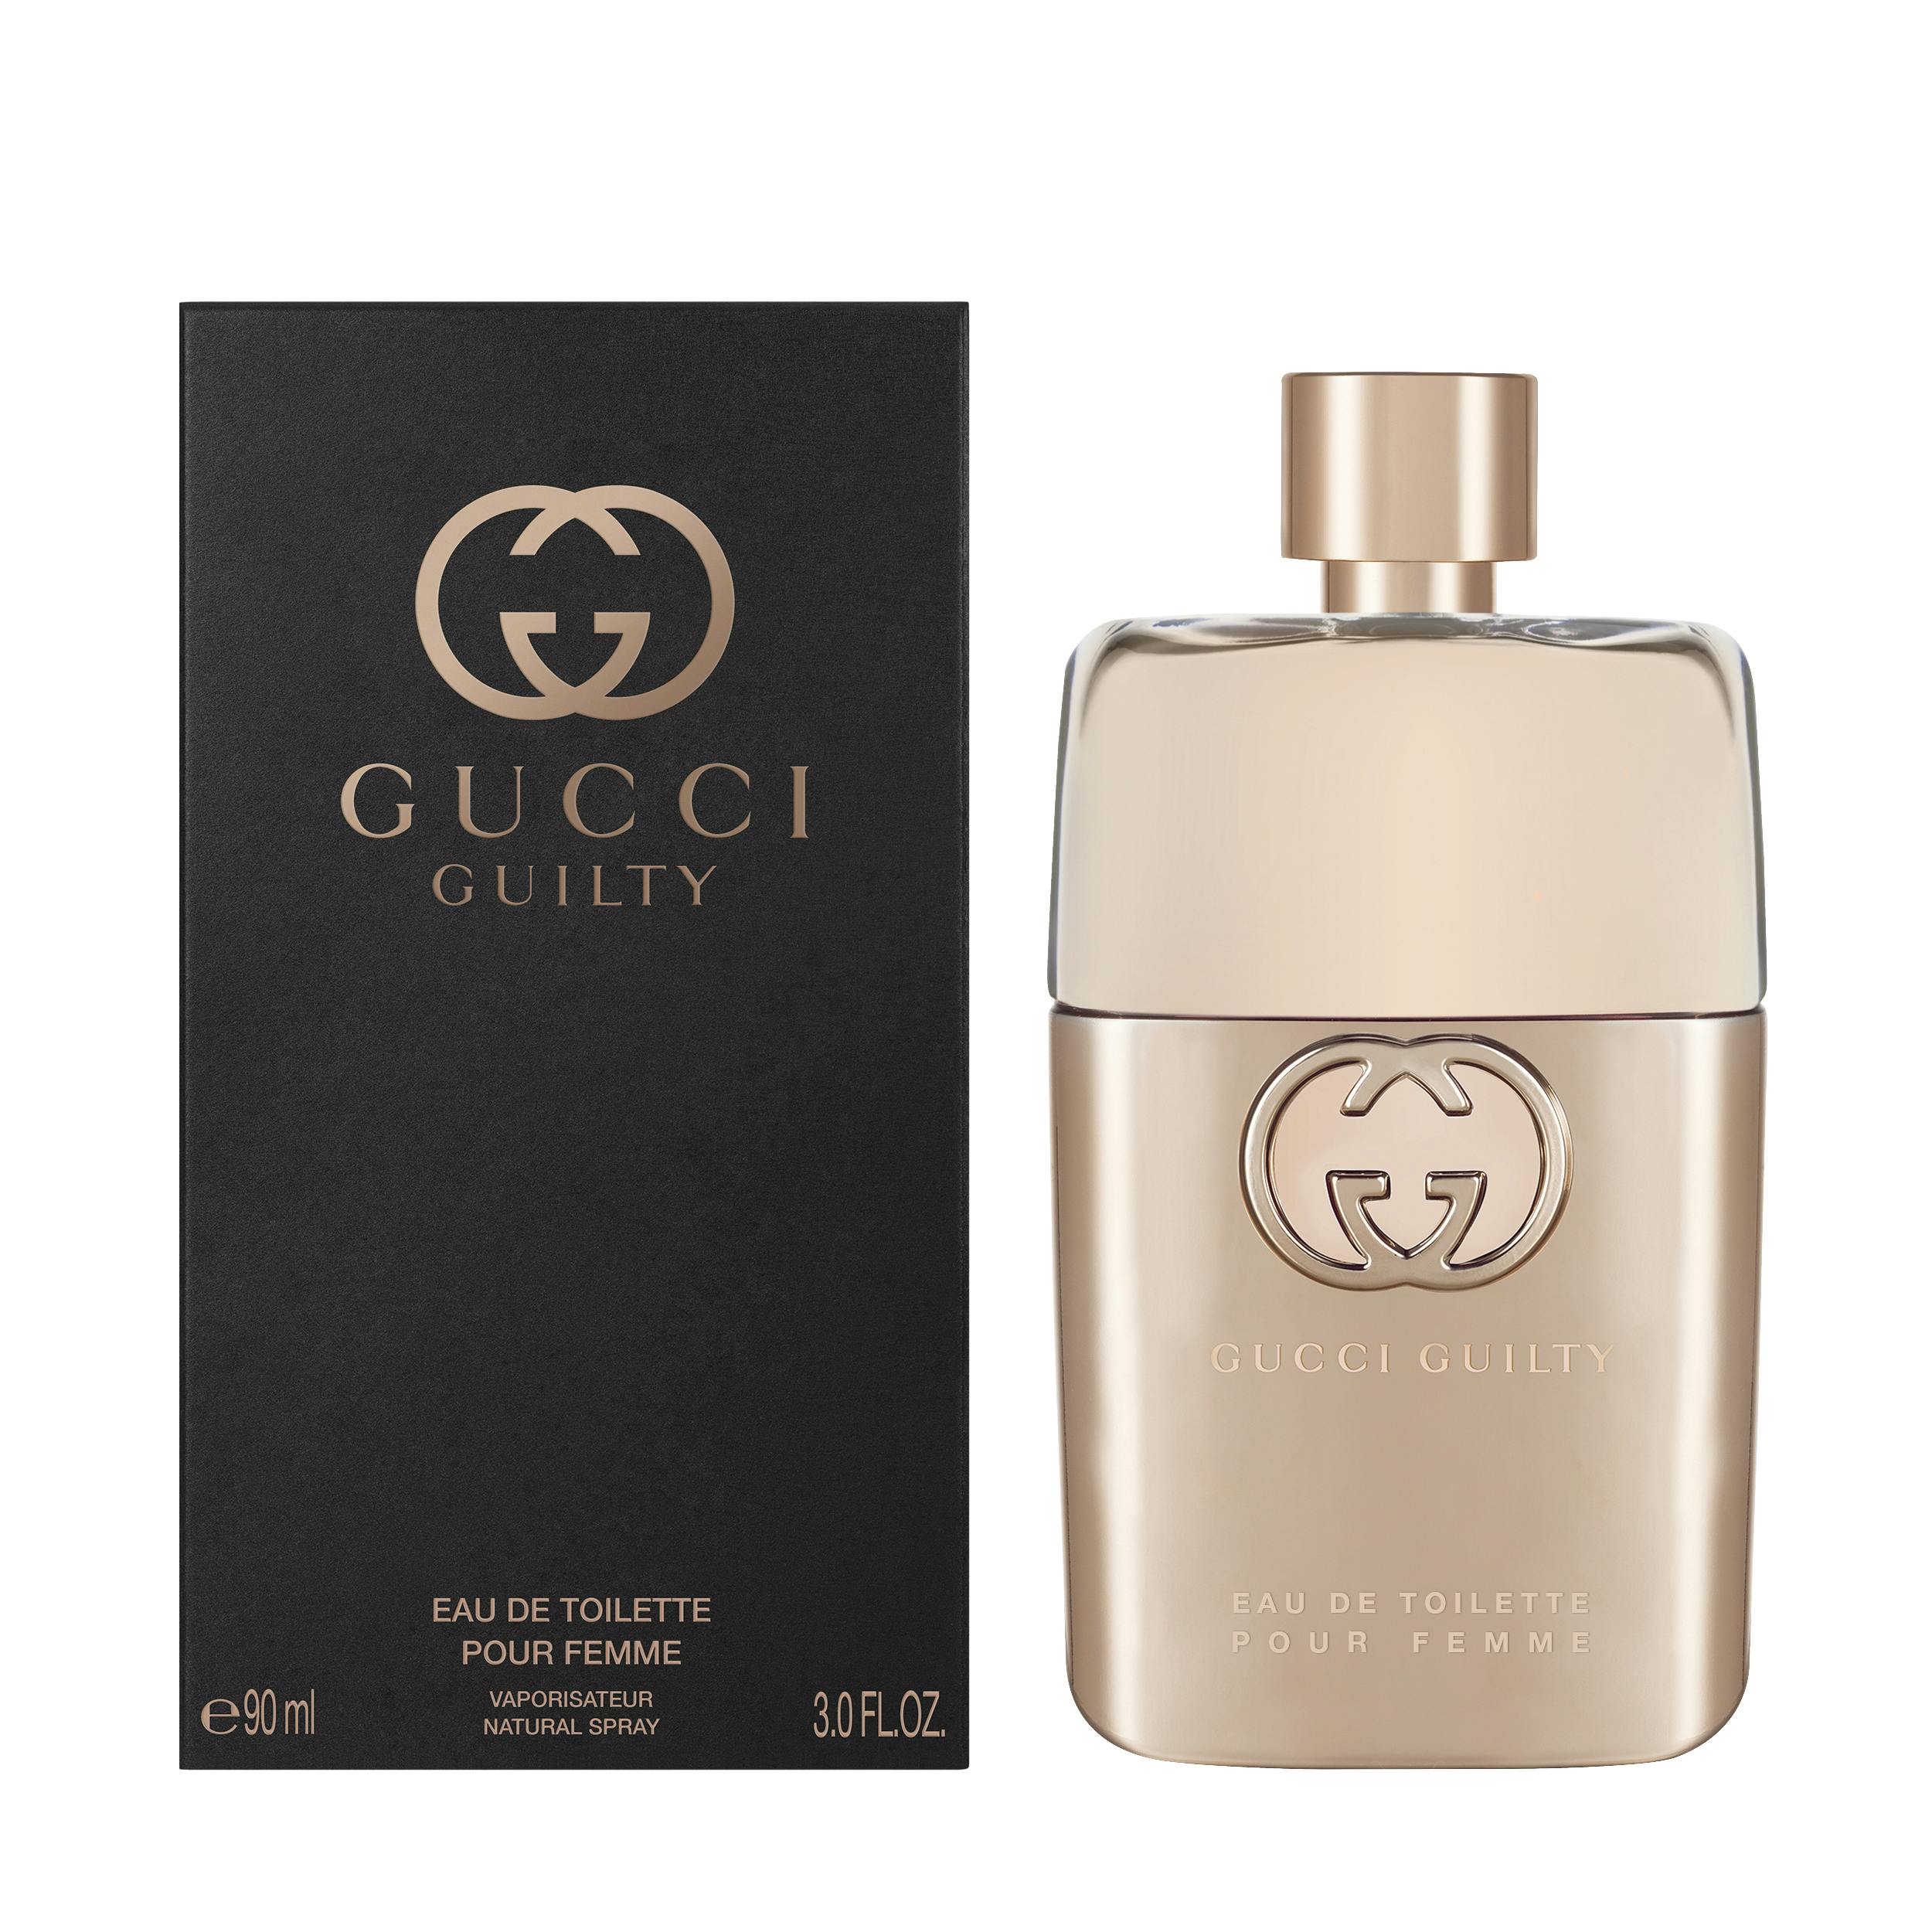 Modderig fotografie Geef rechten Jared Leto Unfolds the Romance with Gucci Guilty Fragrance